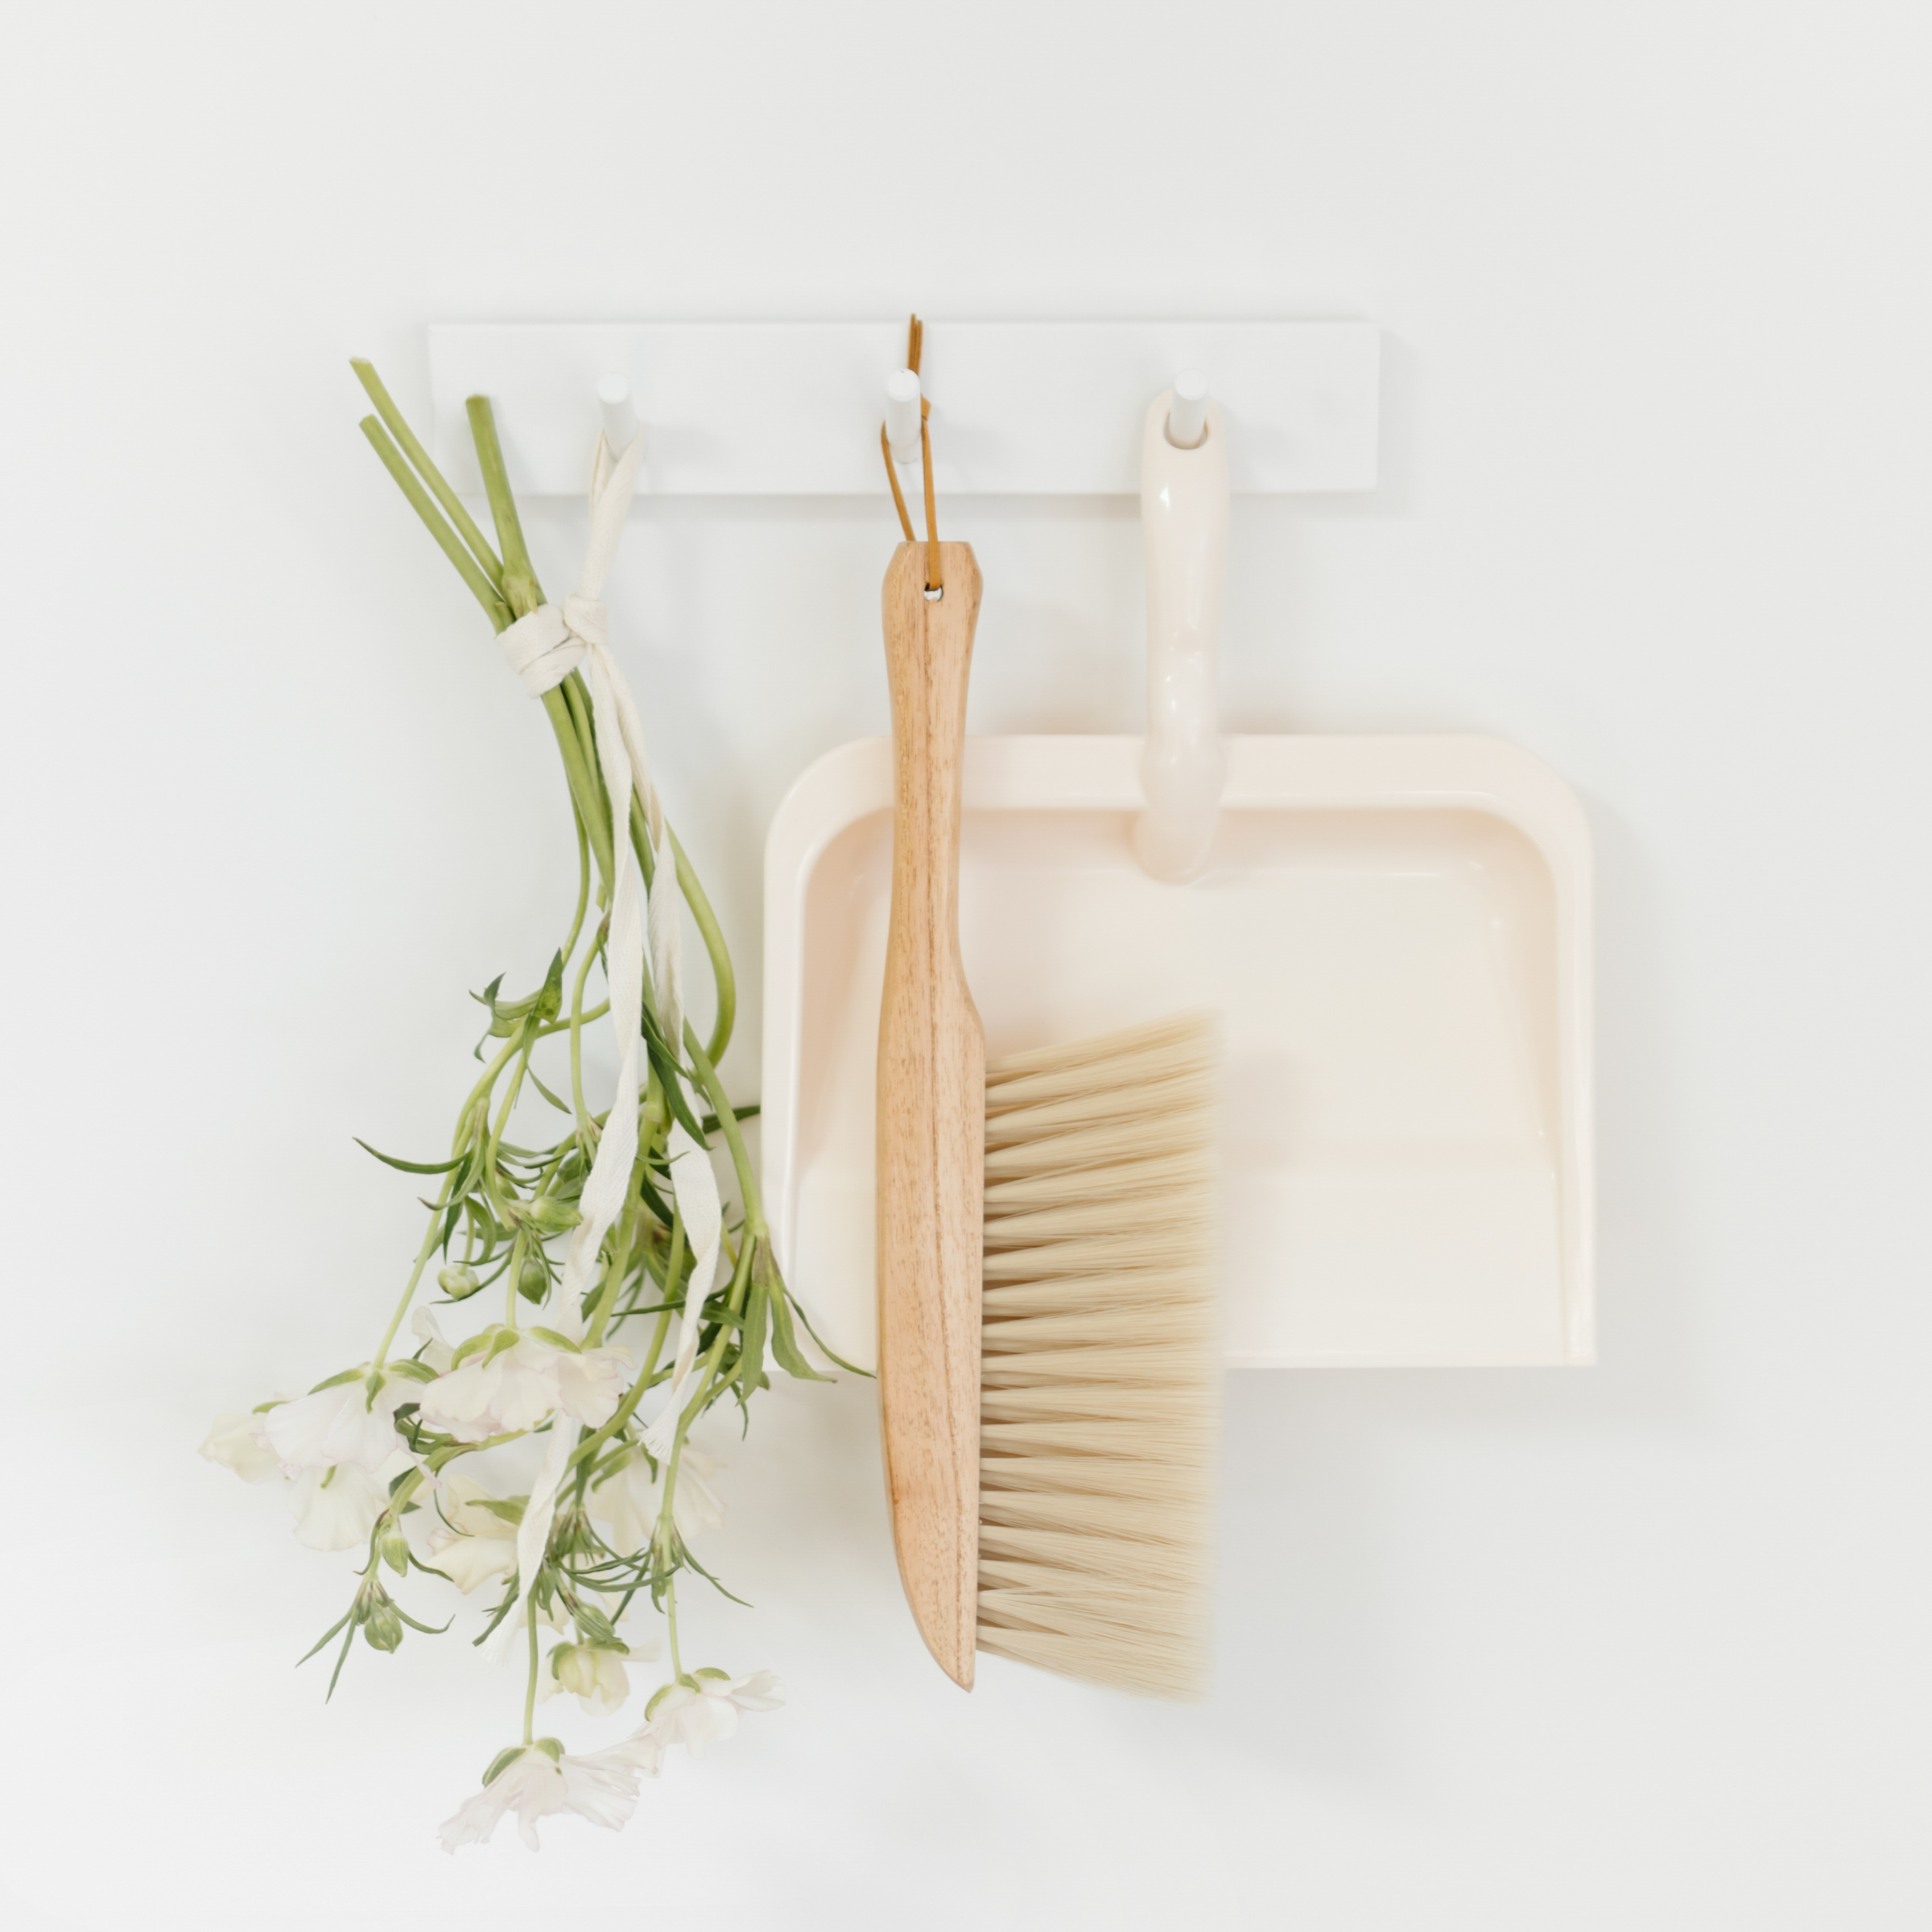 Florals, dust pan, and small broom hanging from wall, a styled stock image perfect for home organizing brands